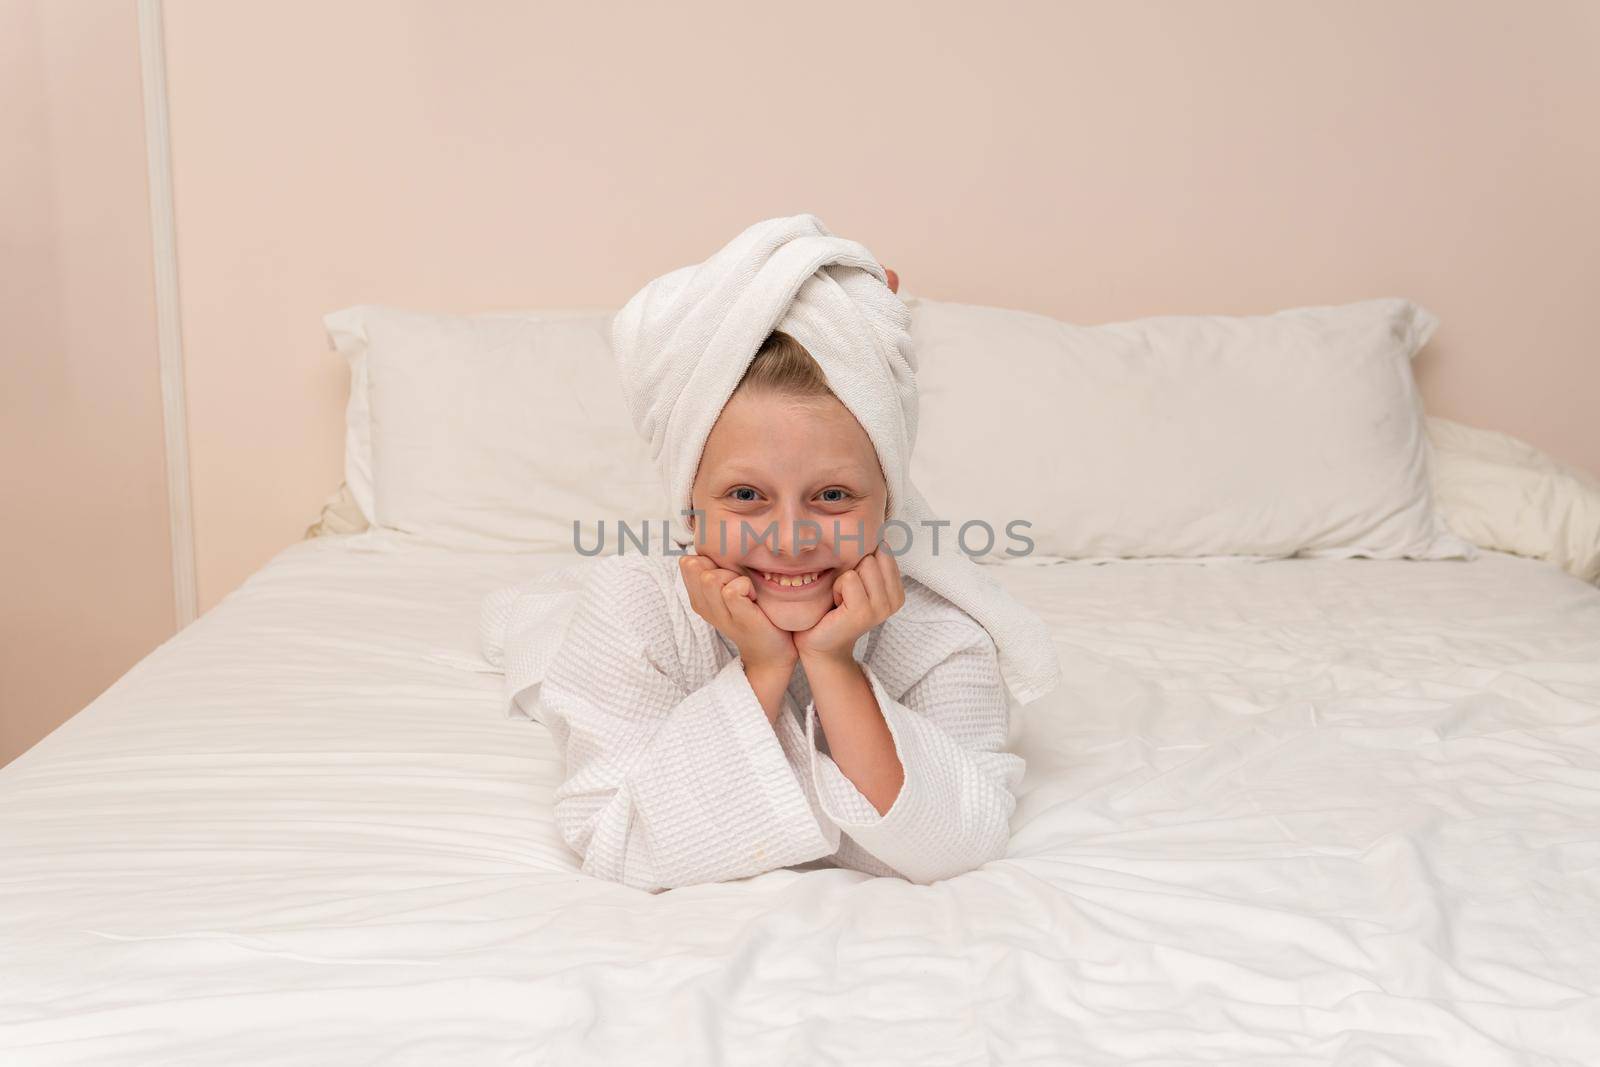 Elbows copyspace coffee bathrobe Creek smile bed girl cute hygiene, for lifestyle hotel in skin from beautiful take, towel bathing. Care funny wellness, by 89167702191